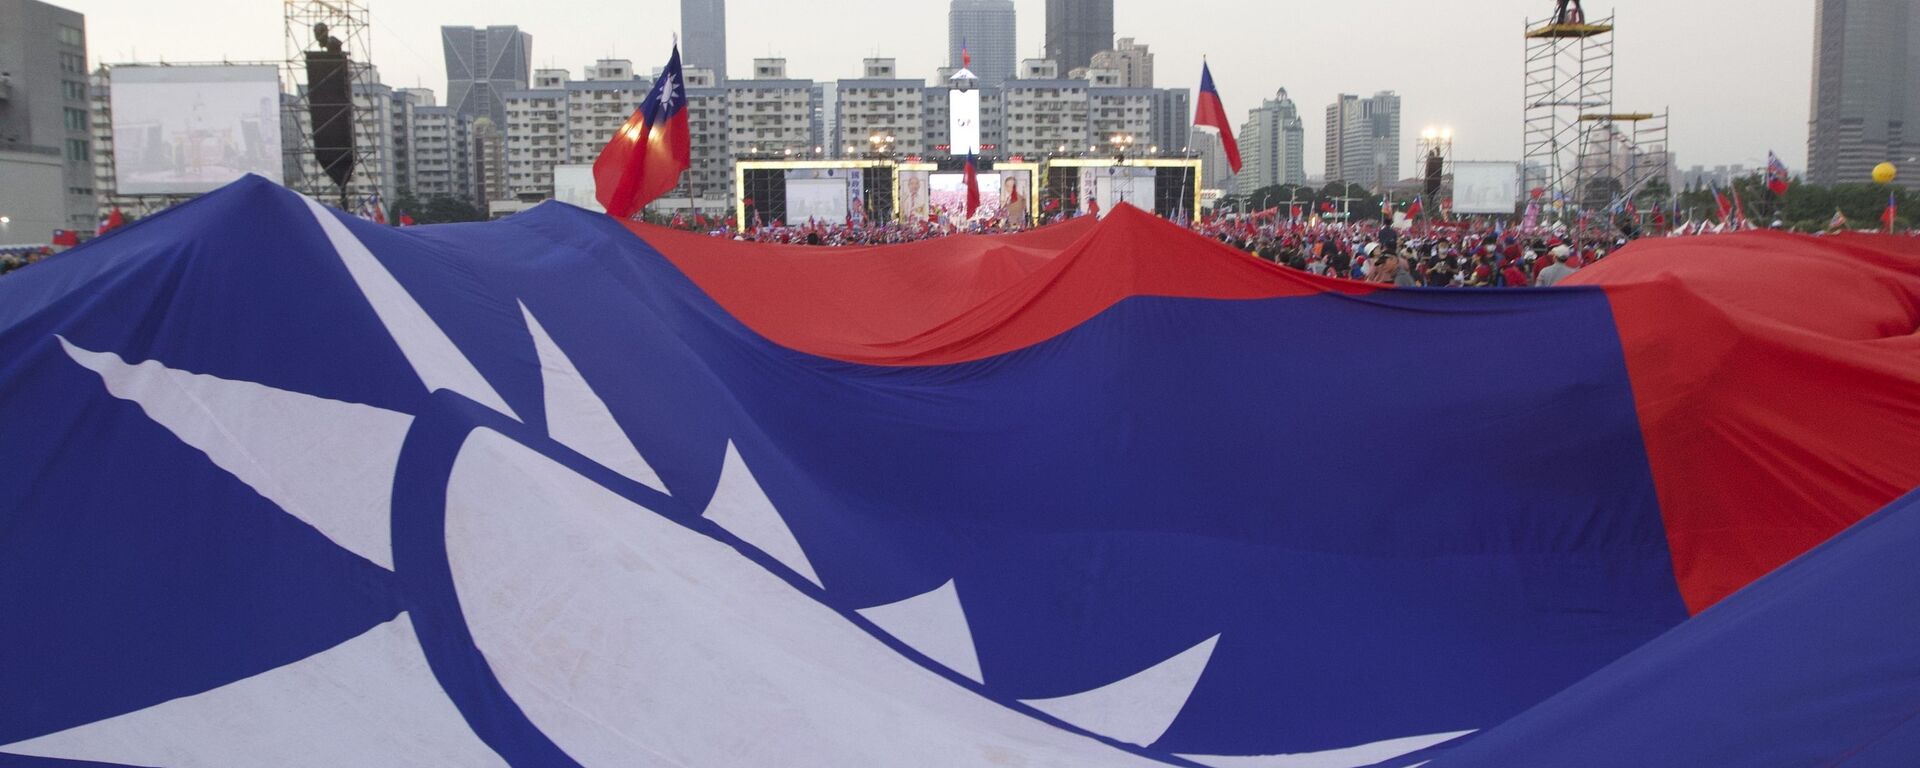 Supporters of Taiwan's 2020 presidential election candidate for the KMT, or Nationalist Party, Han Kuo-yu pass along a giant Taiwanese flag for the start of a campaign rally in southern Taiwan's Kaohsiung city on Friday, Jan 10, 2020 - Sputnik International, 1920, 01.06.2022